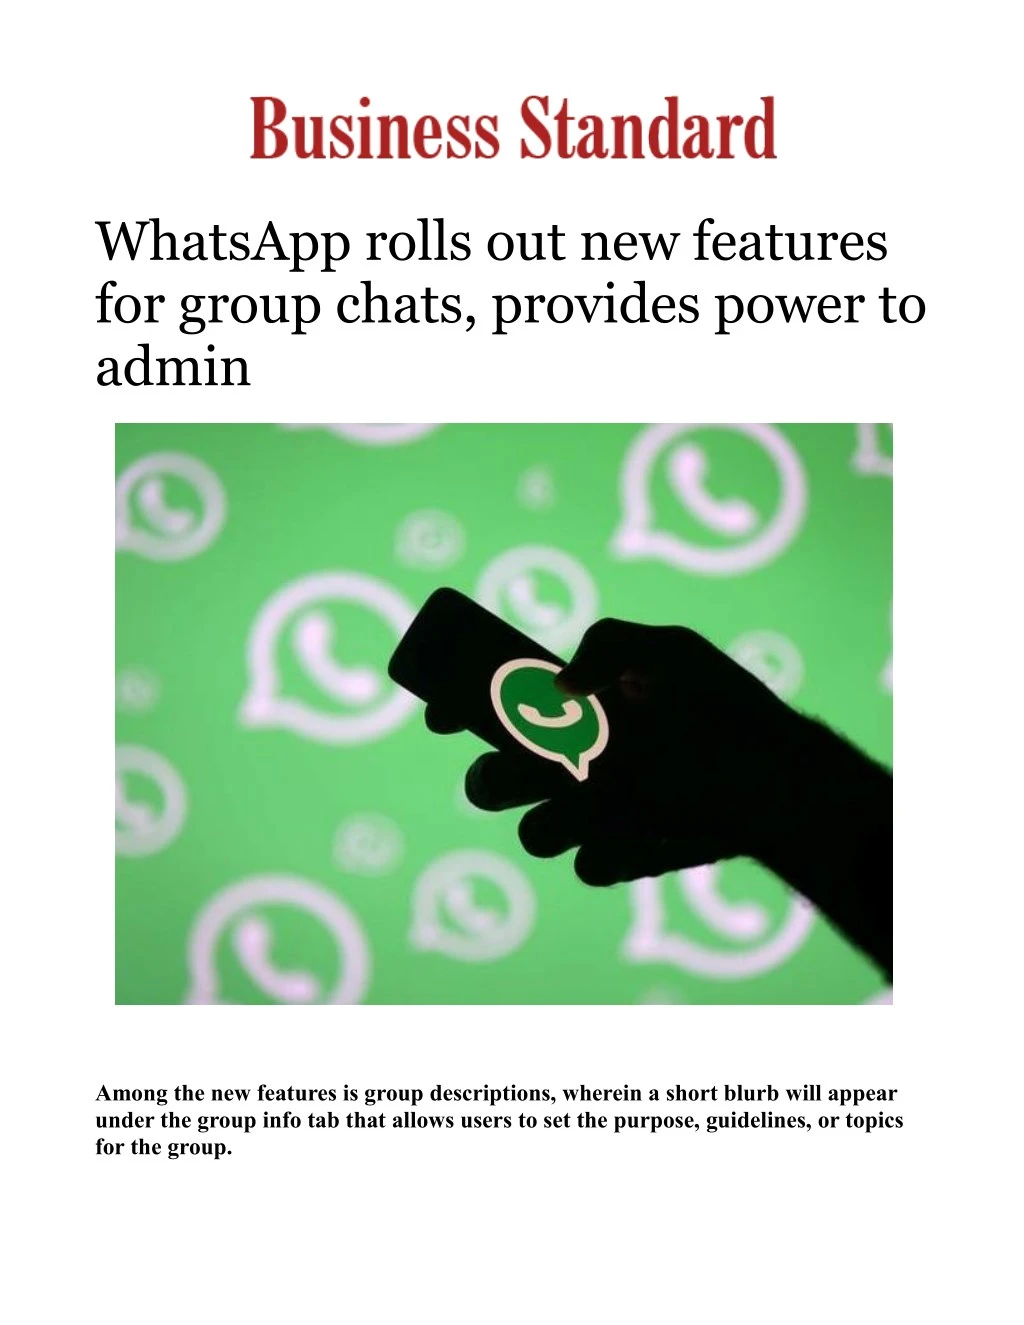 whatsapp rolls out new features for group chats